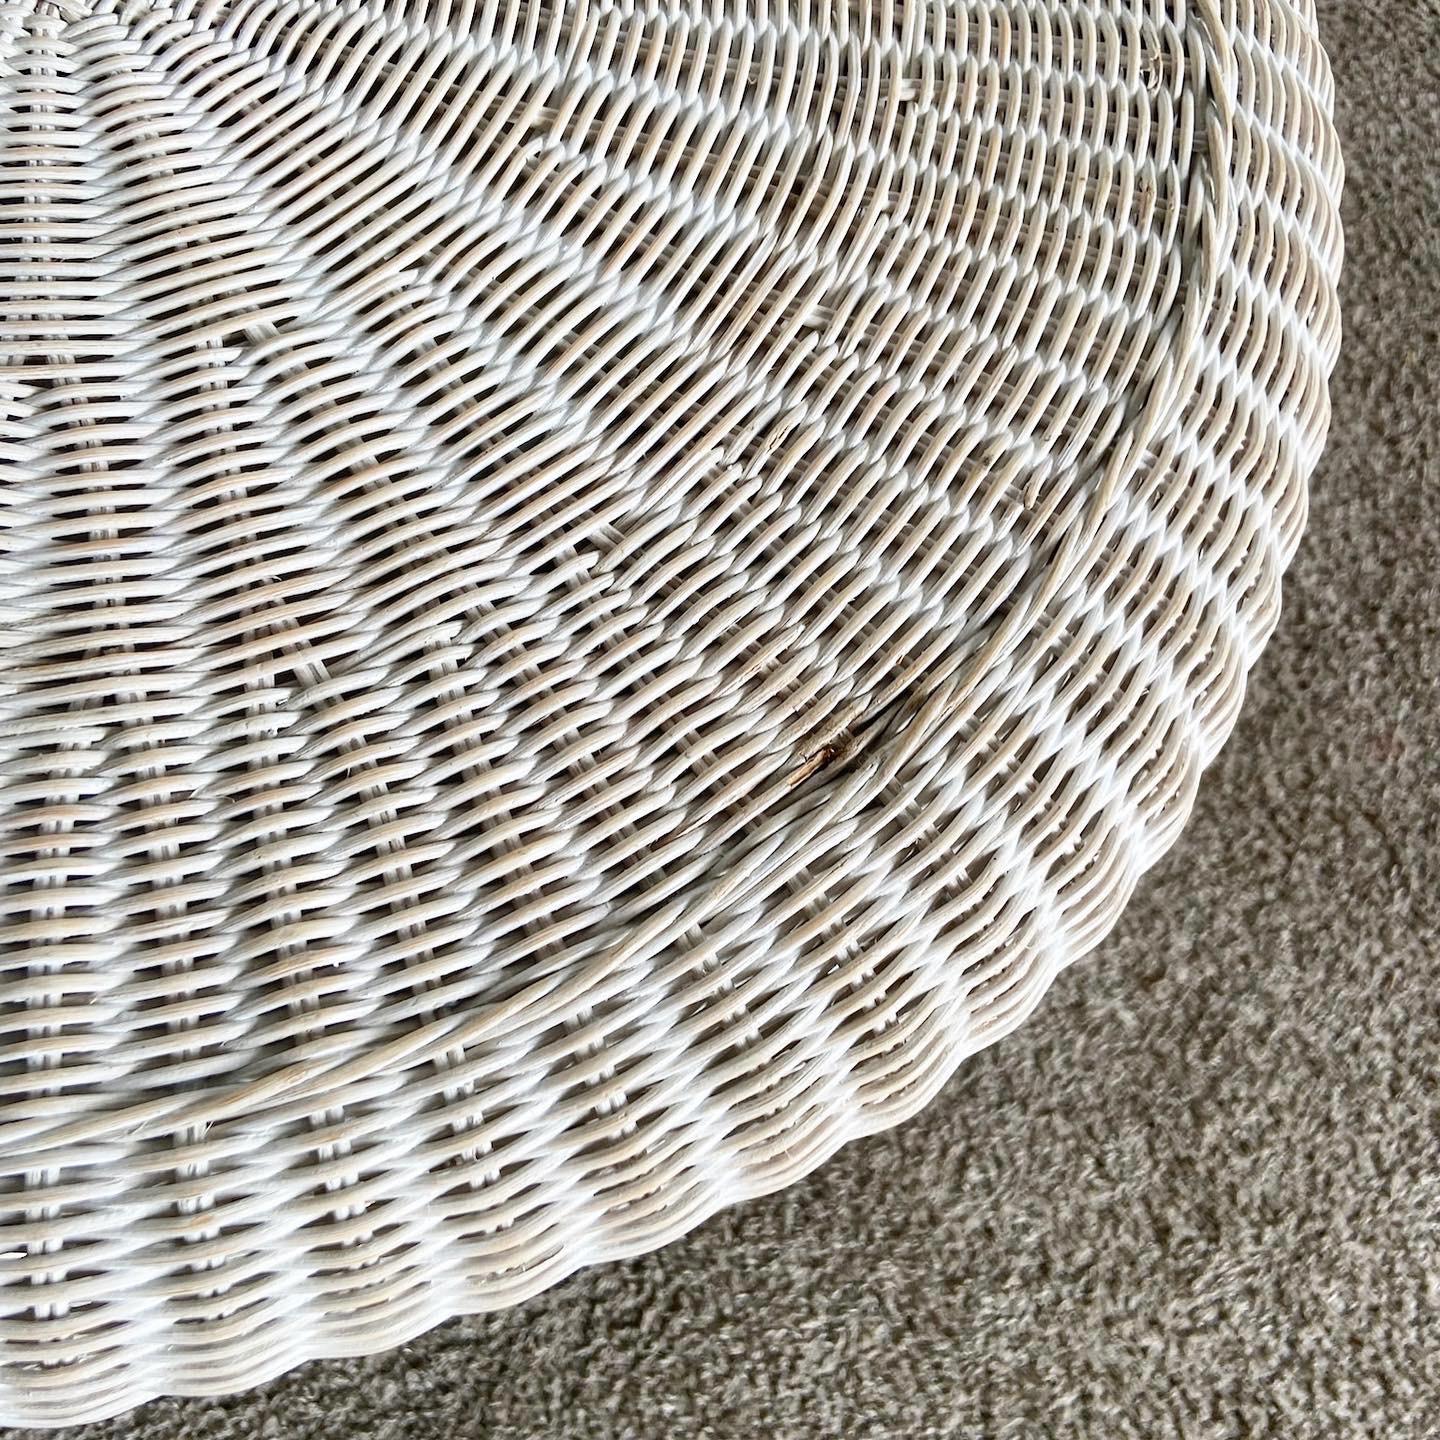 Boho Chic White Washed Wicker Side Table In Good Condition For Sale In Delray Beach, FL